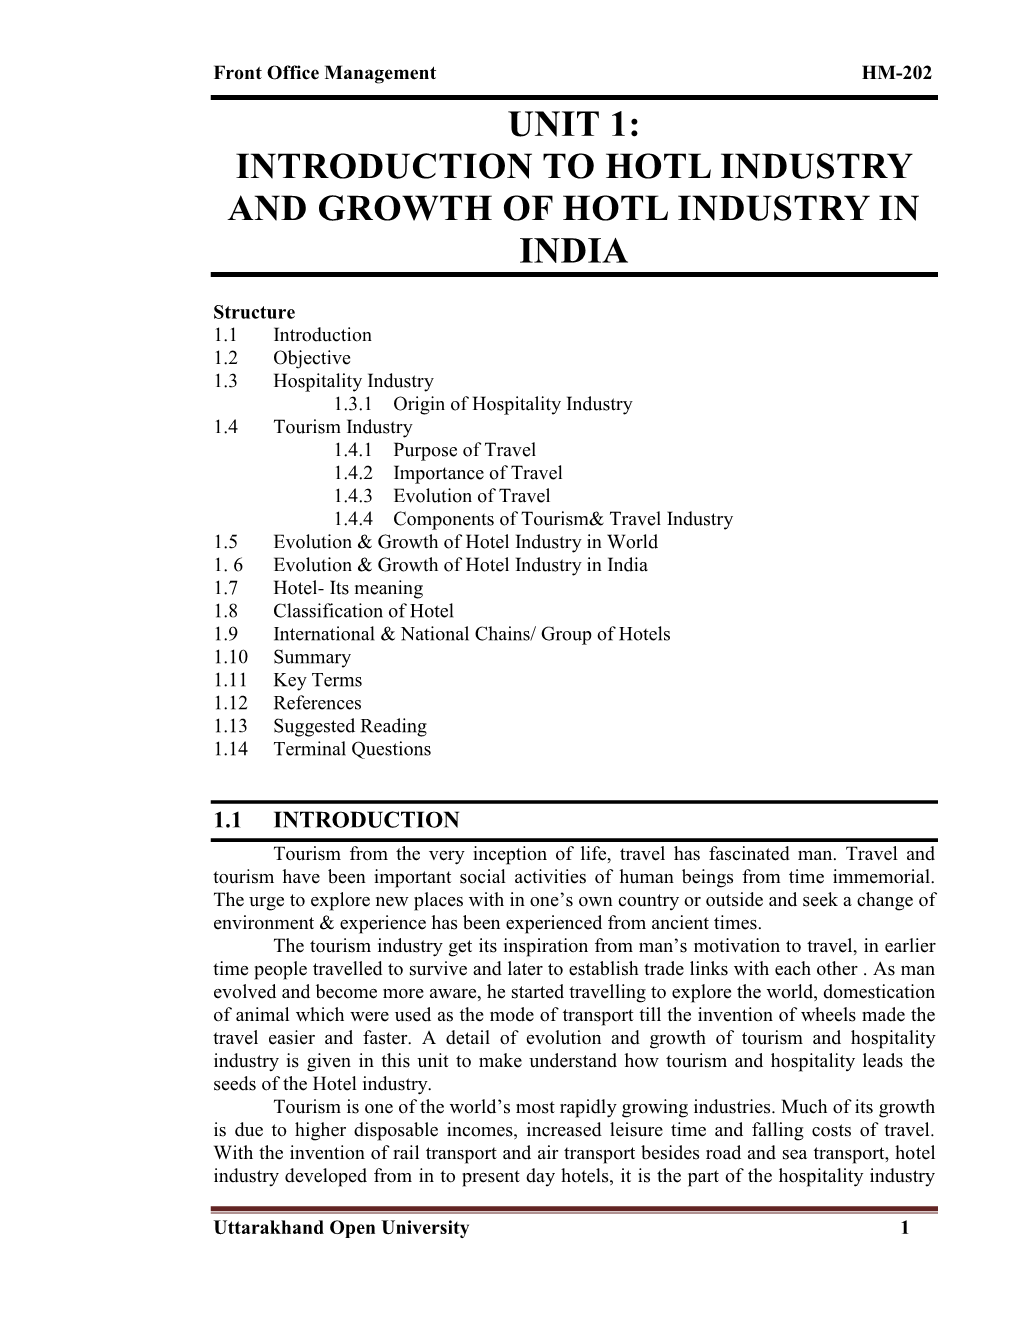 Unit 1: Introduction to Hotl Industry and Growth of Hotl Industry in India